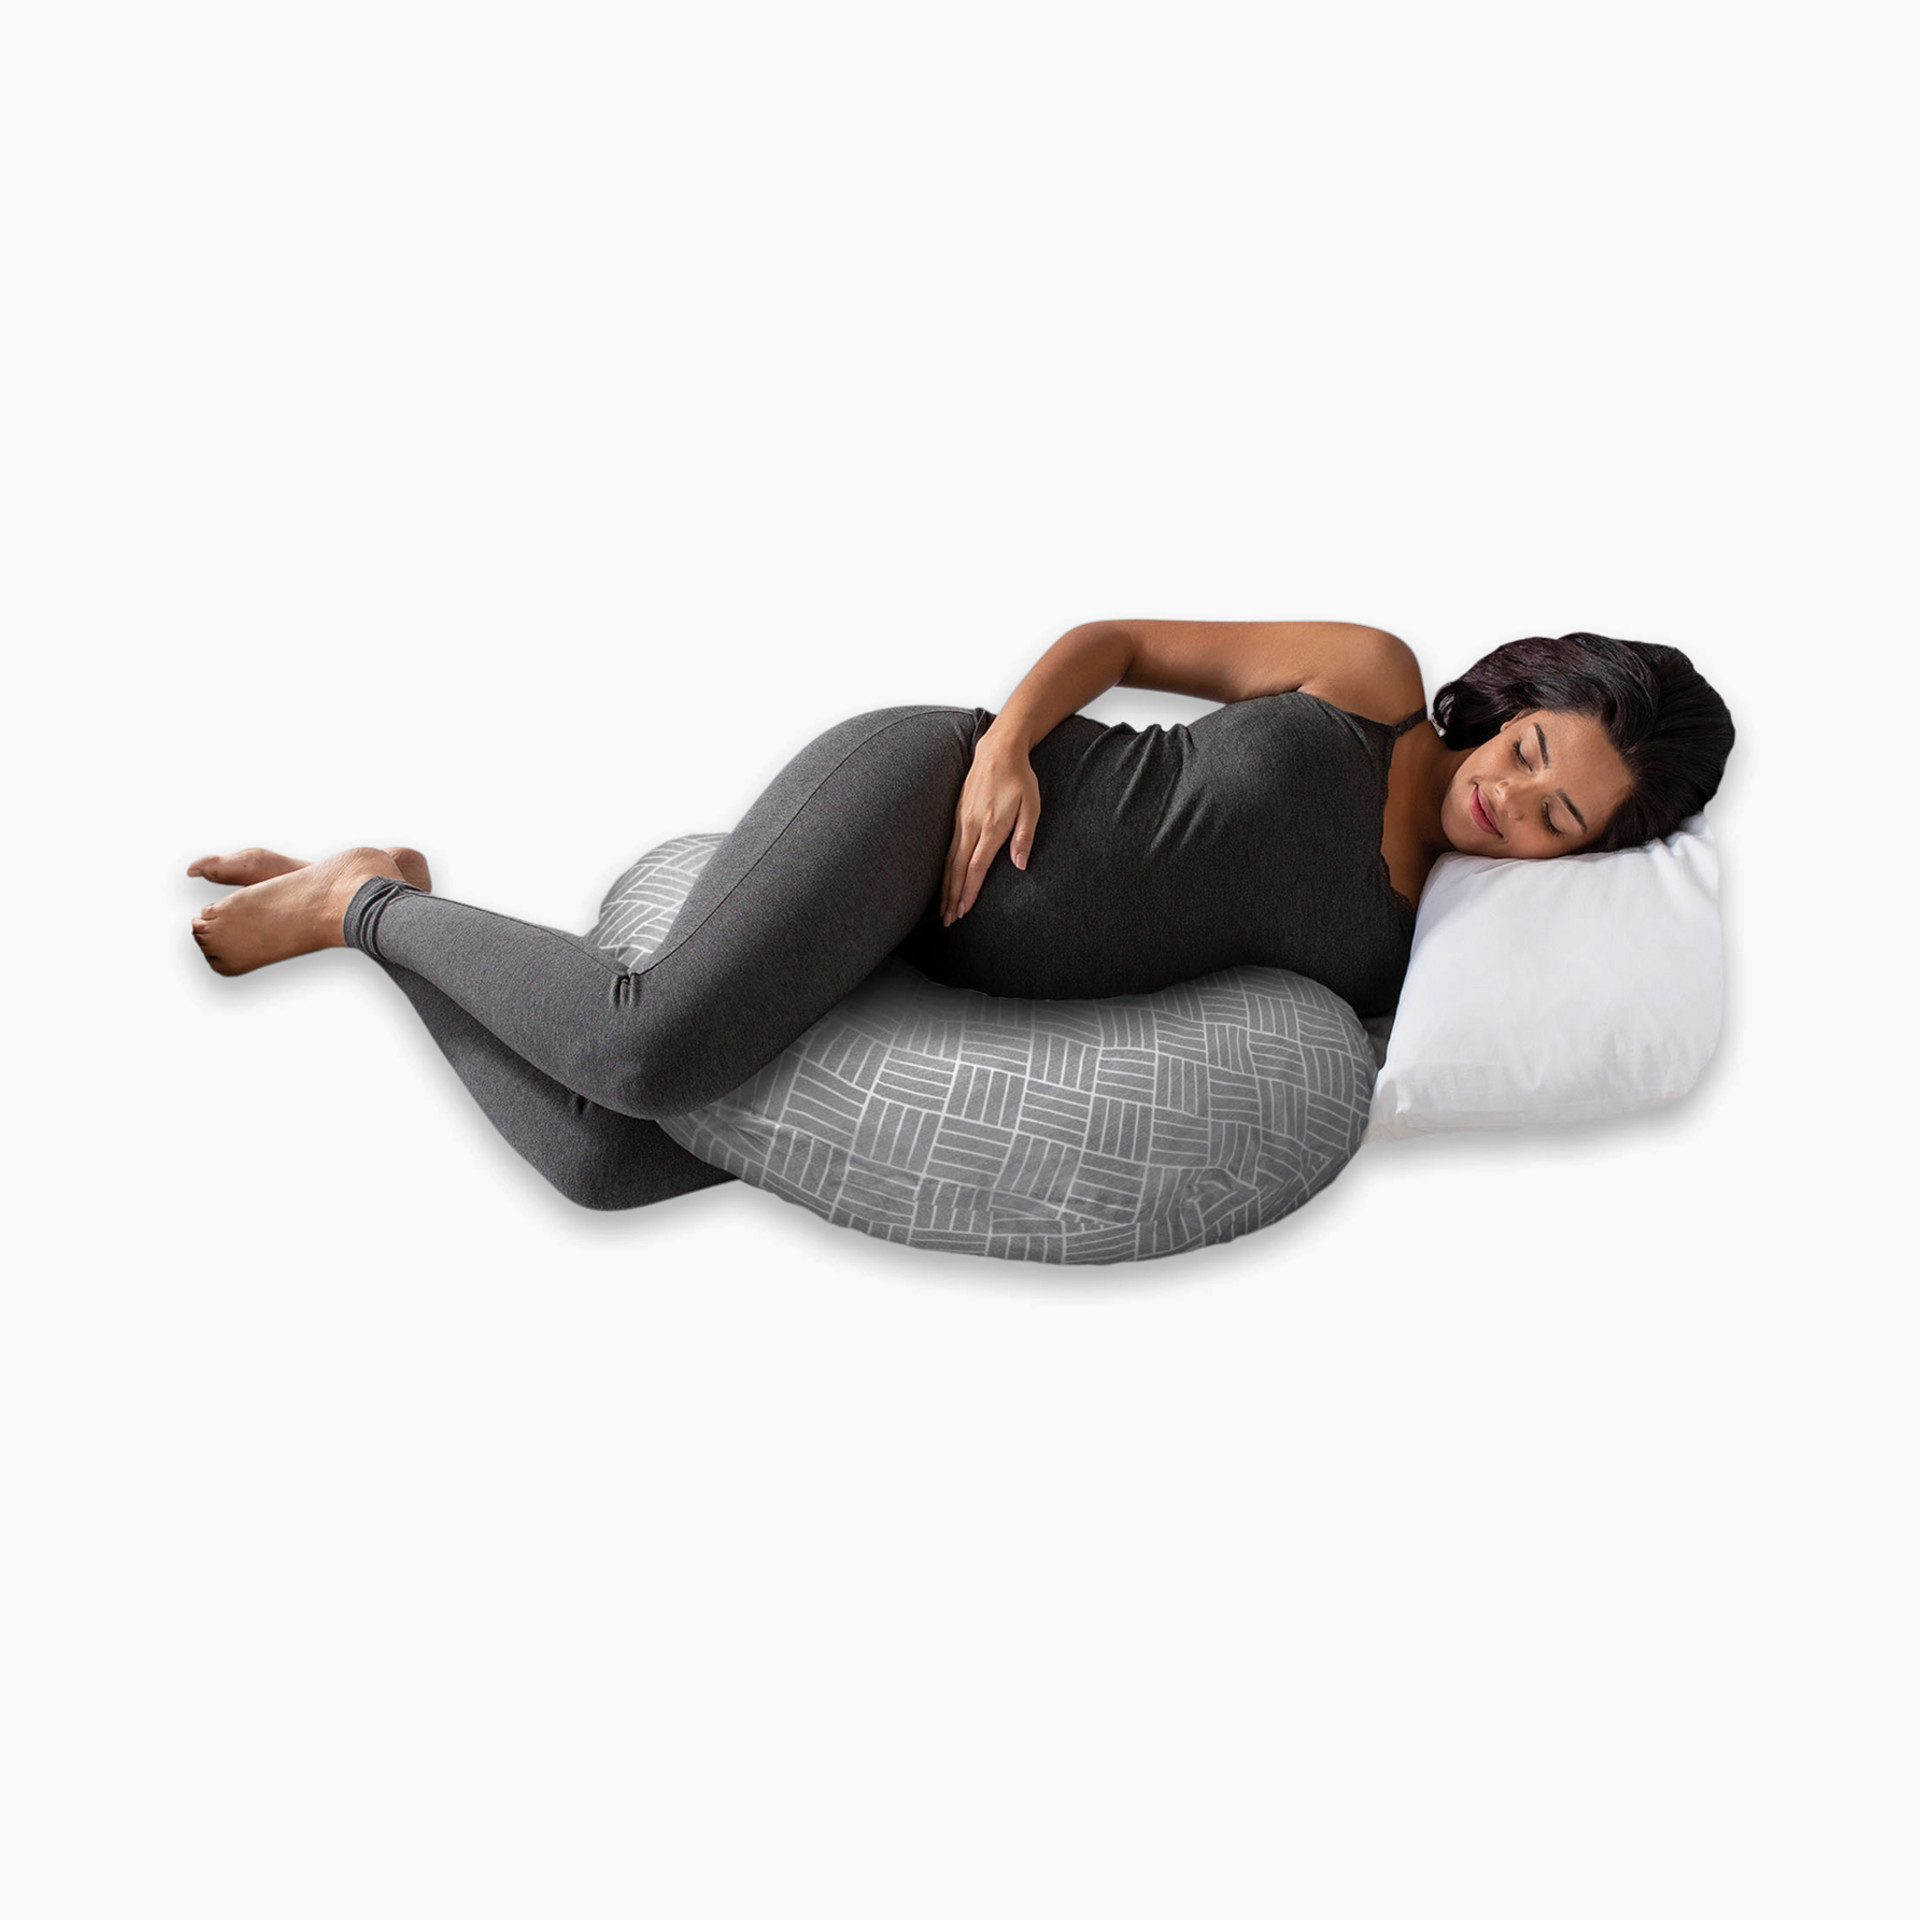 Chill Multi-Use Pregnancy Pillow - Support for Back, Hips, Legs, Belly -  J-Shape